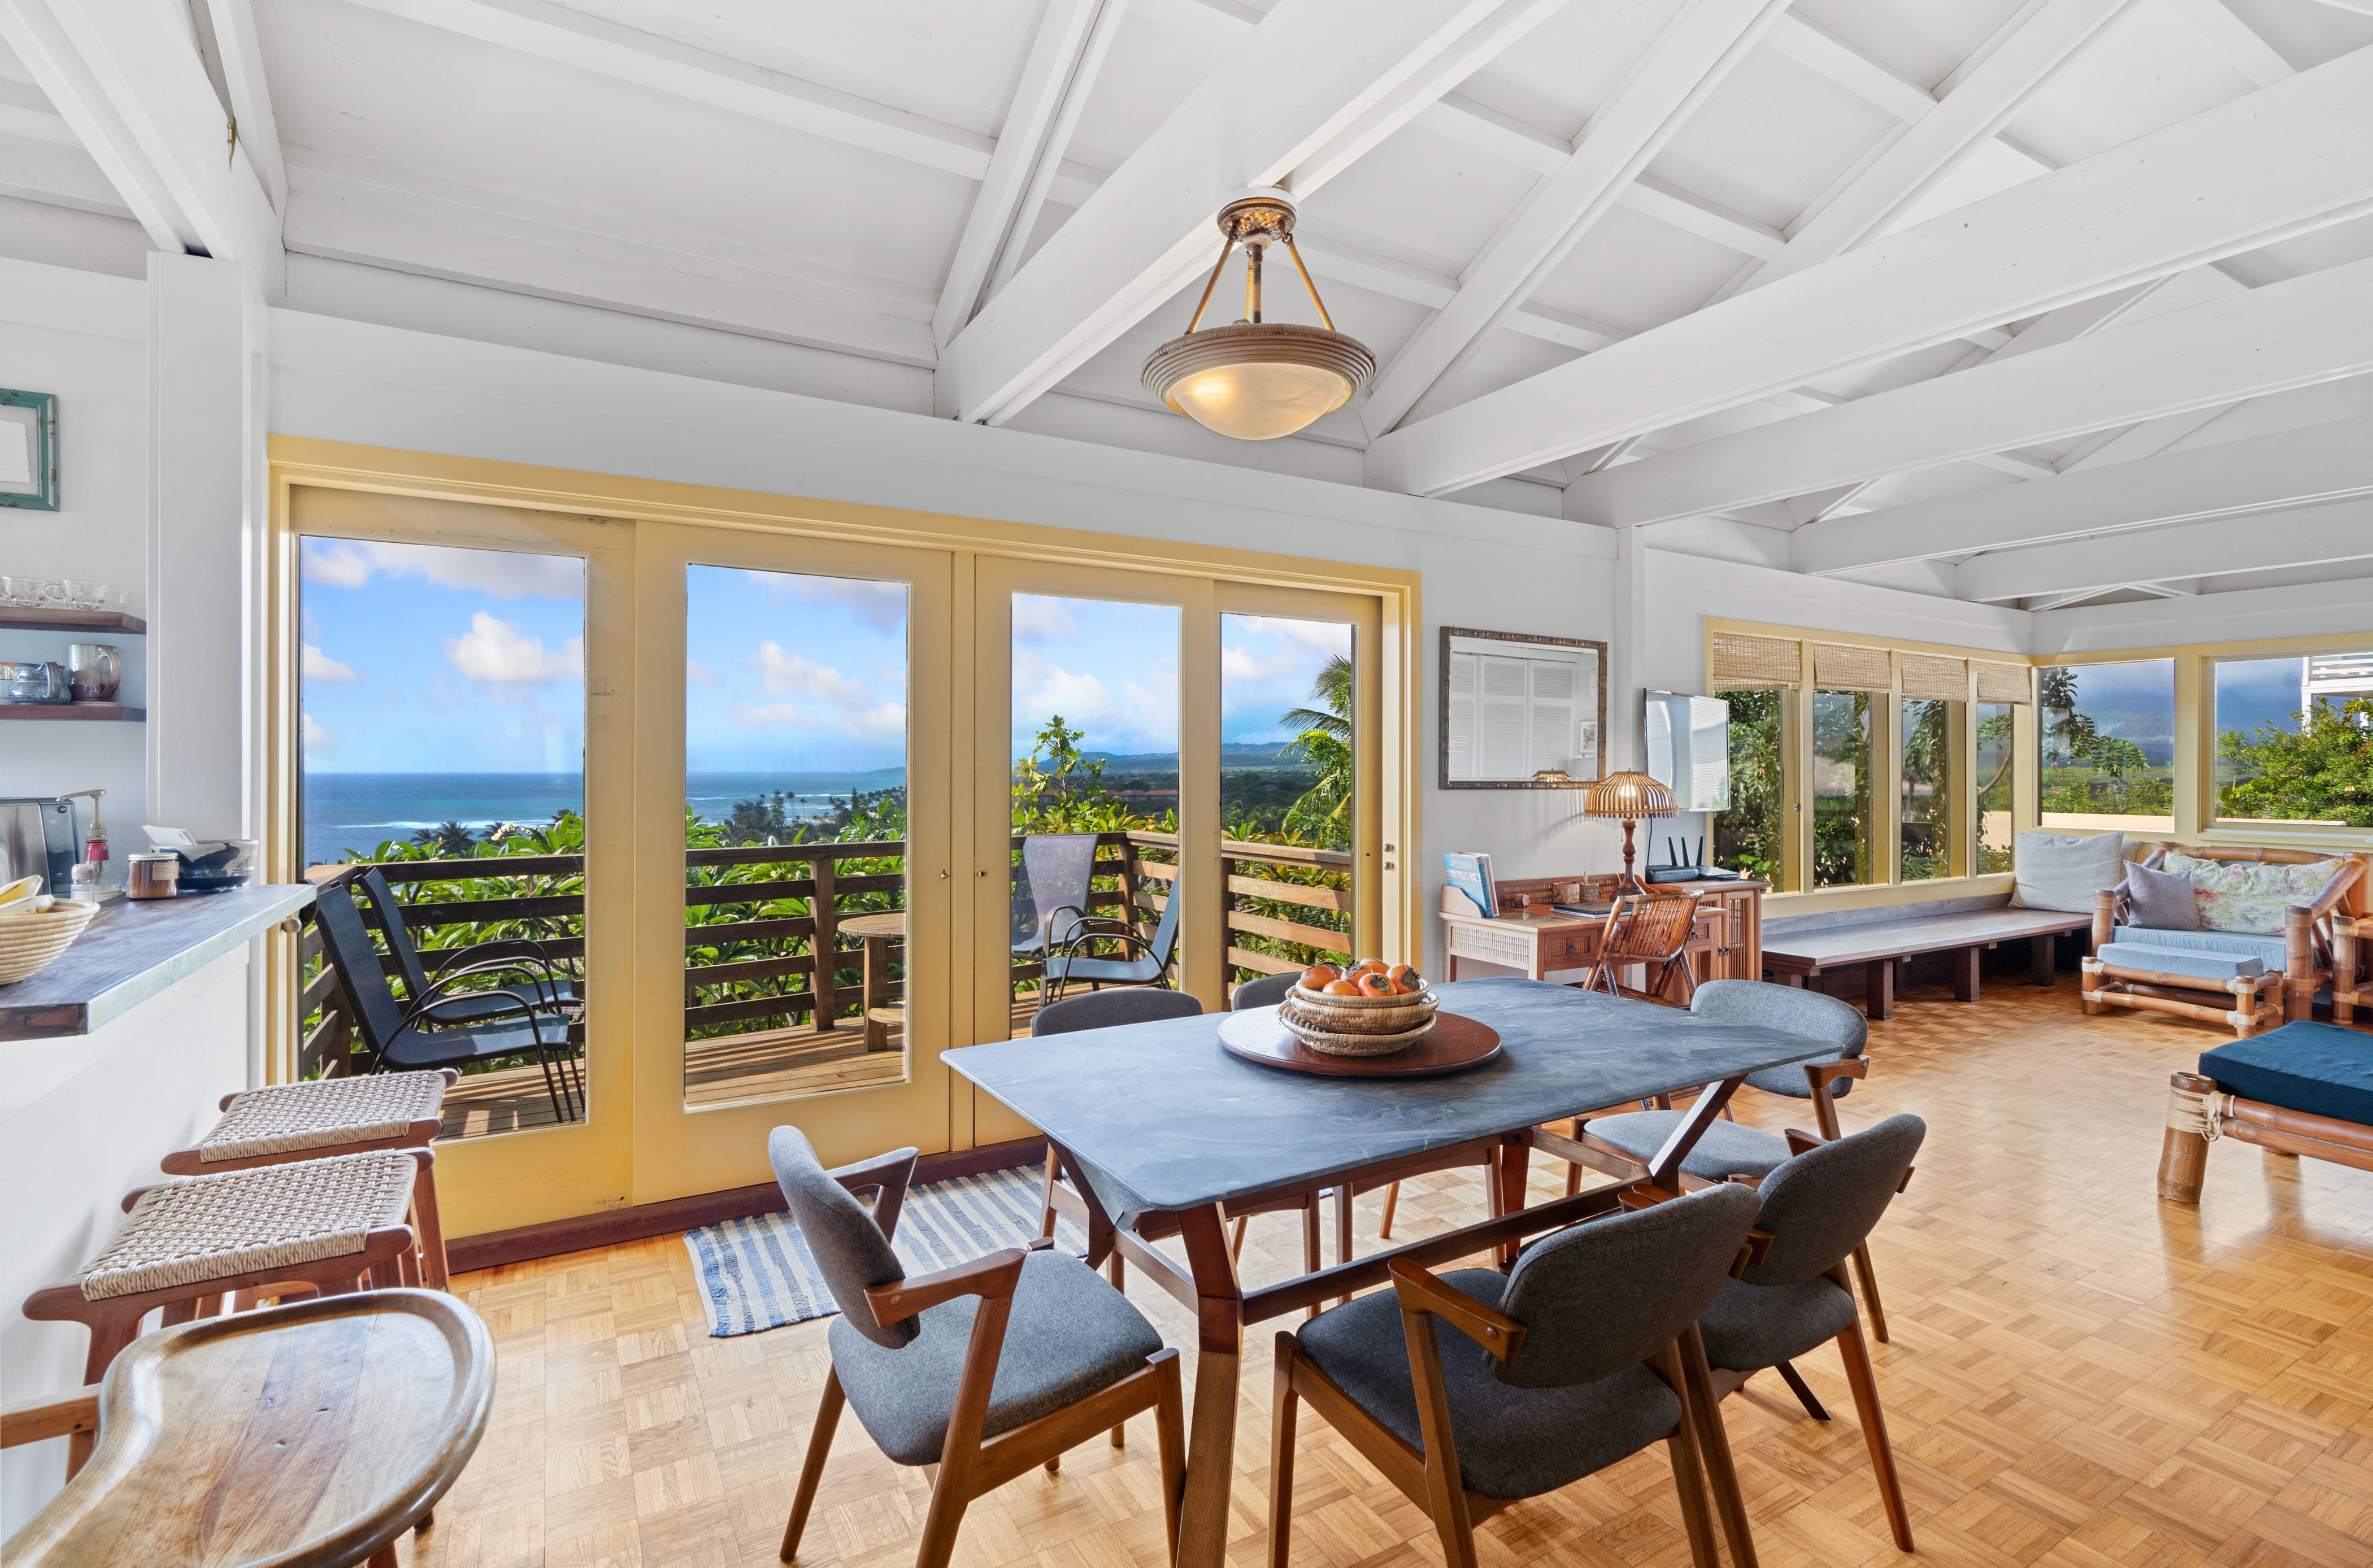 Amazing views of two Poipu beaches and surf spots, the Poipu coastline, Ni'ihau island, swaying palms, and rugged green mountains and waterfalls from the living area located on the second floor.